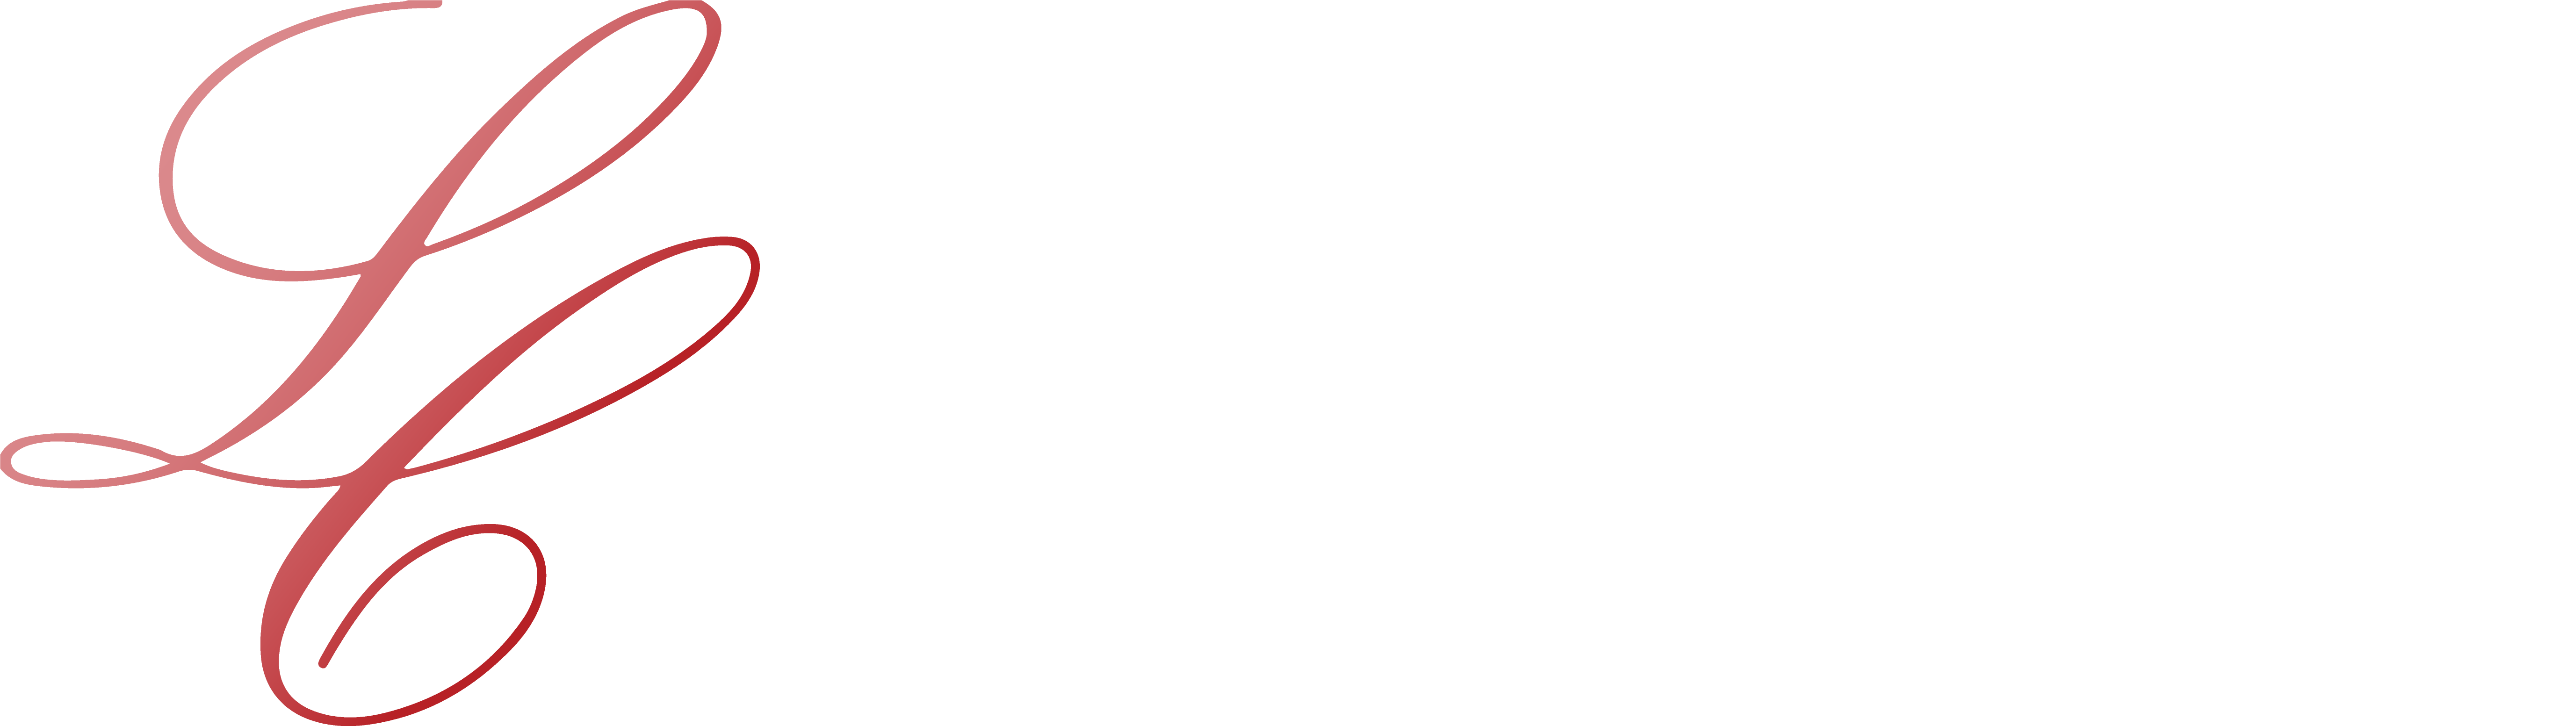 Lucy challenger logo